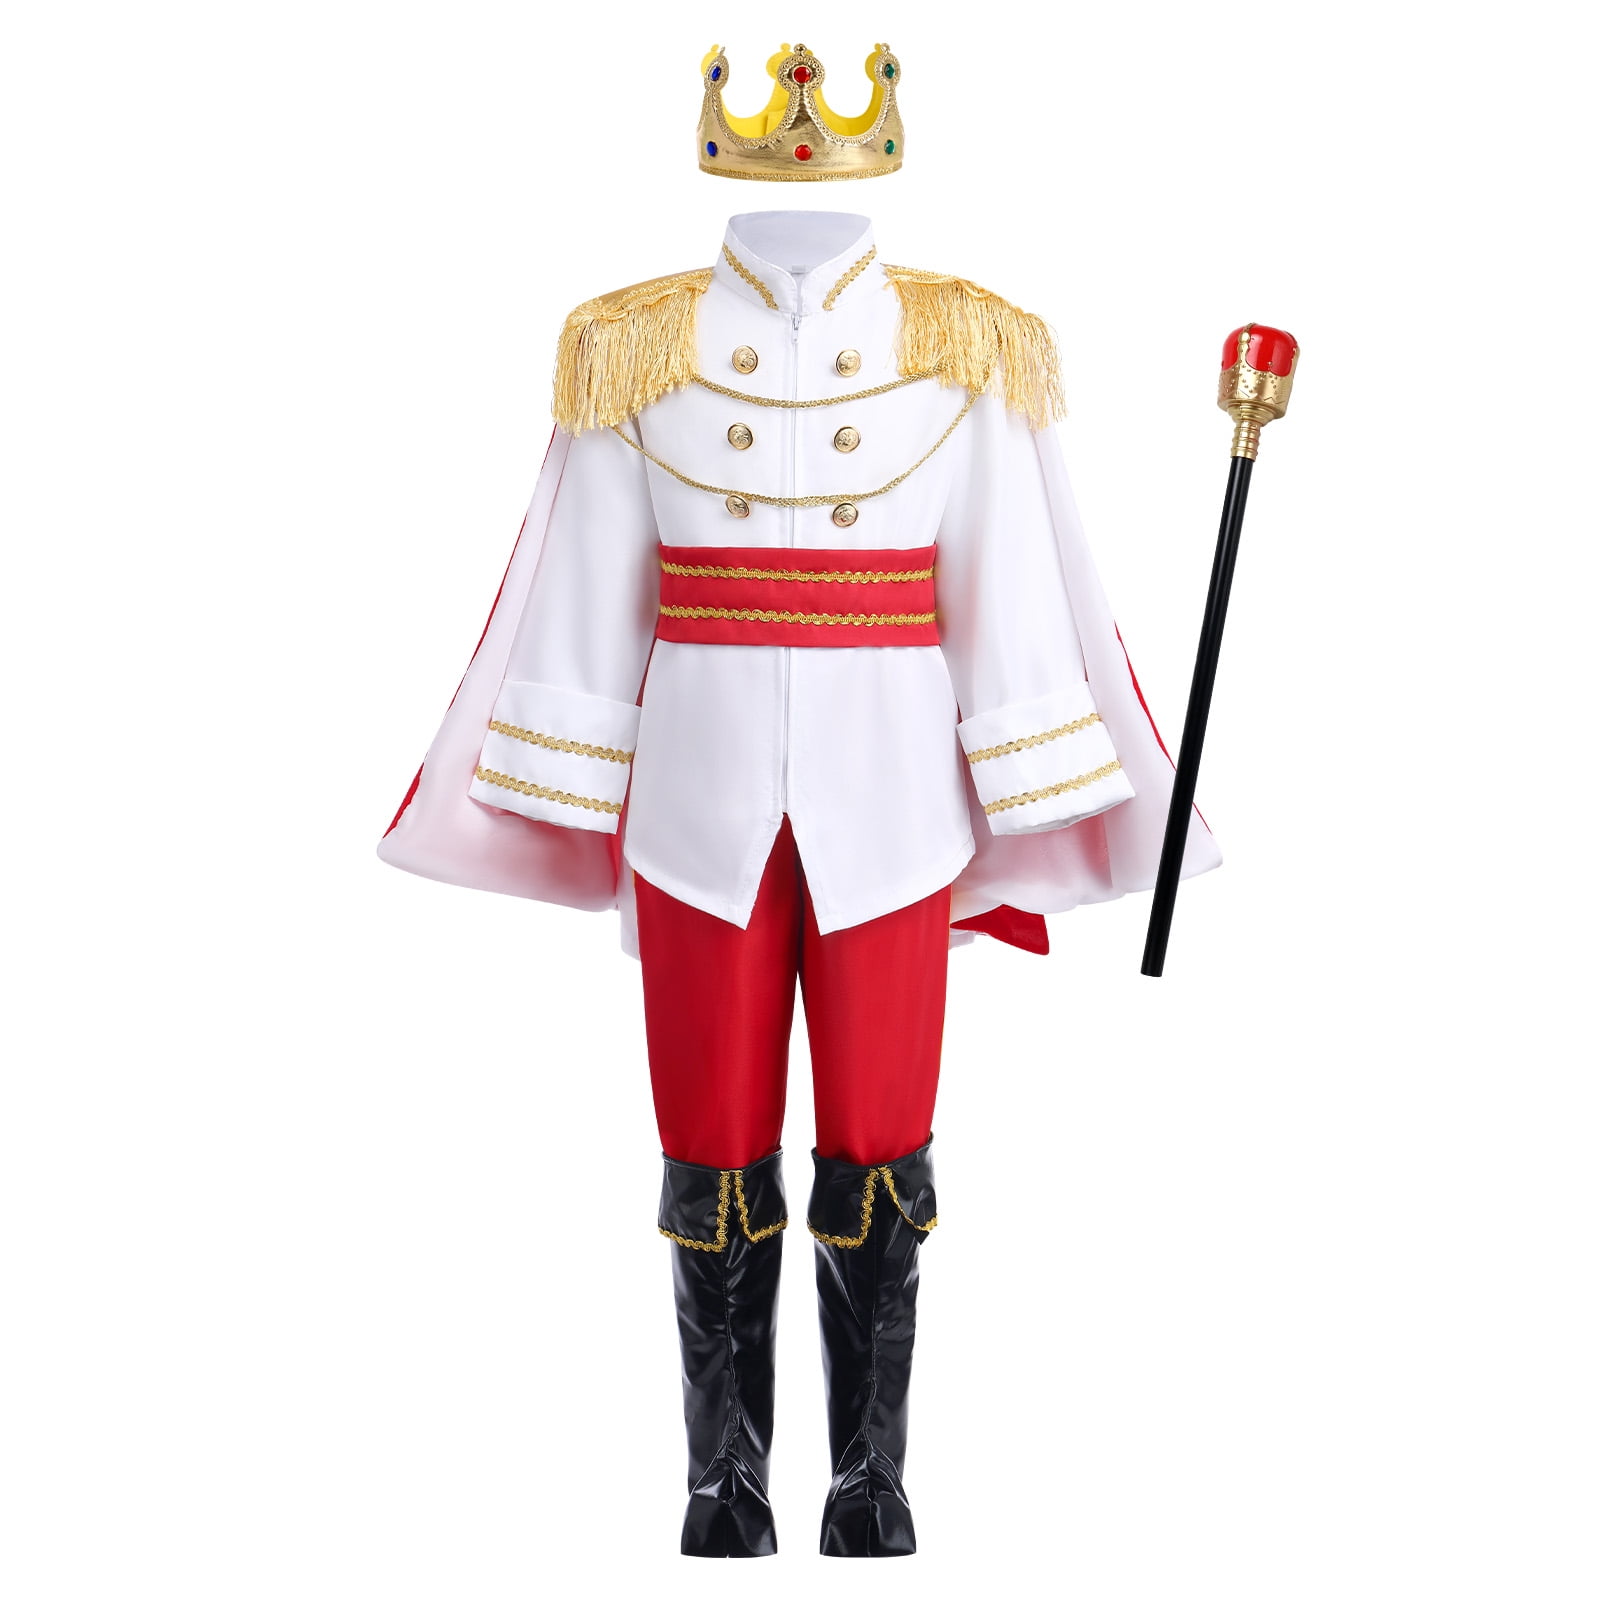 Mirror man King Costume for artists and party-goers